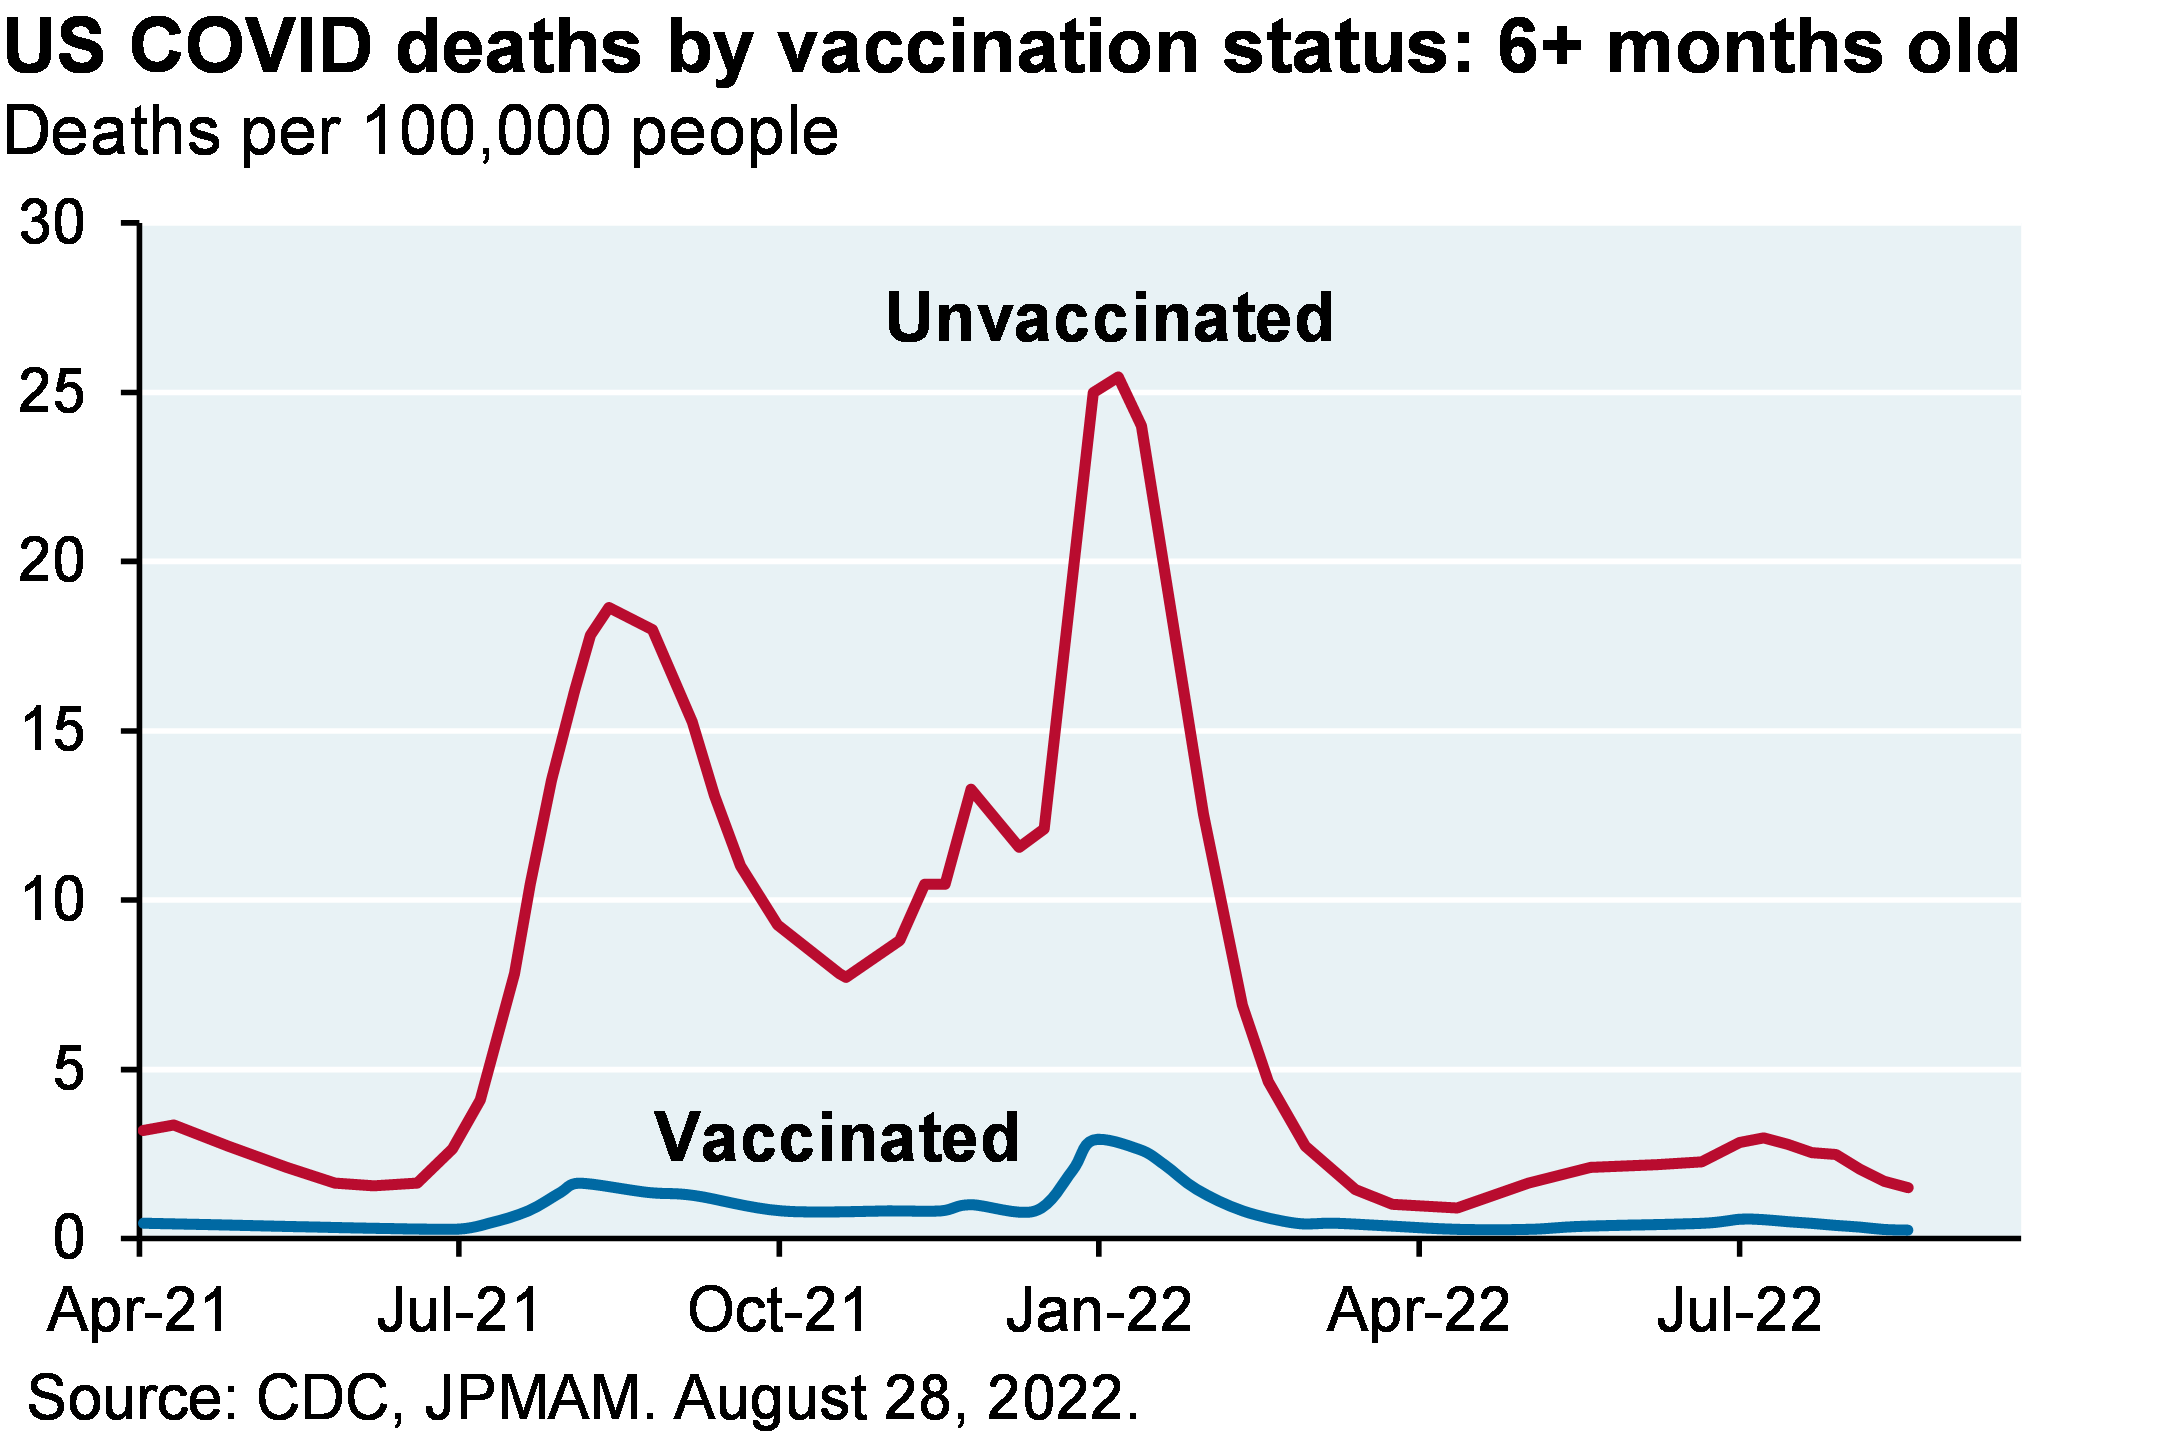 Line chart shows mortality rates for the US unvaccinated population vs the vaccinated population. The mortality rate among vaccinated people has been consistently much lower than the unvaccinated rate since 2021